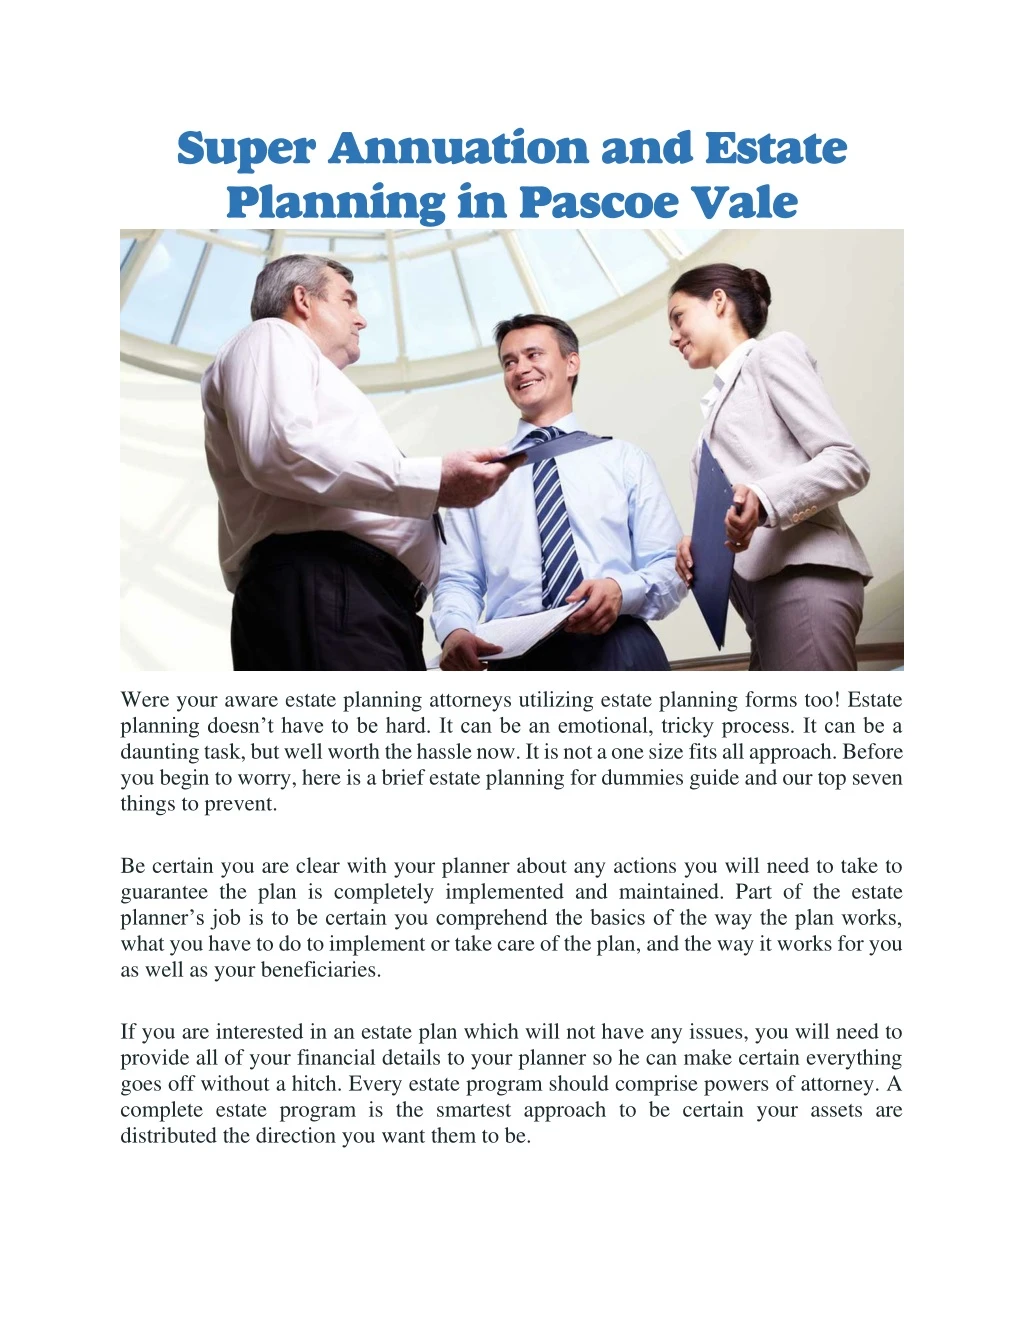 super annuation and estate planning in pascoe vale